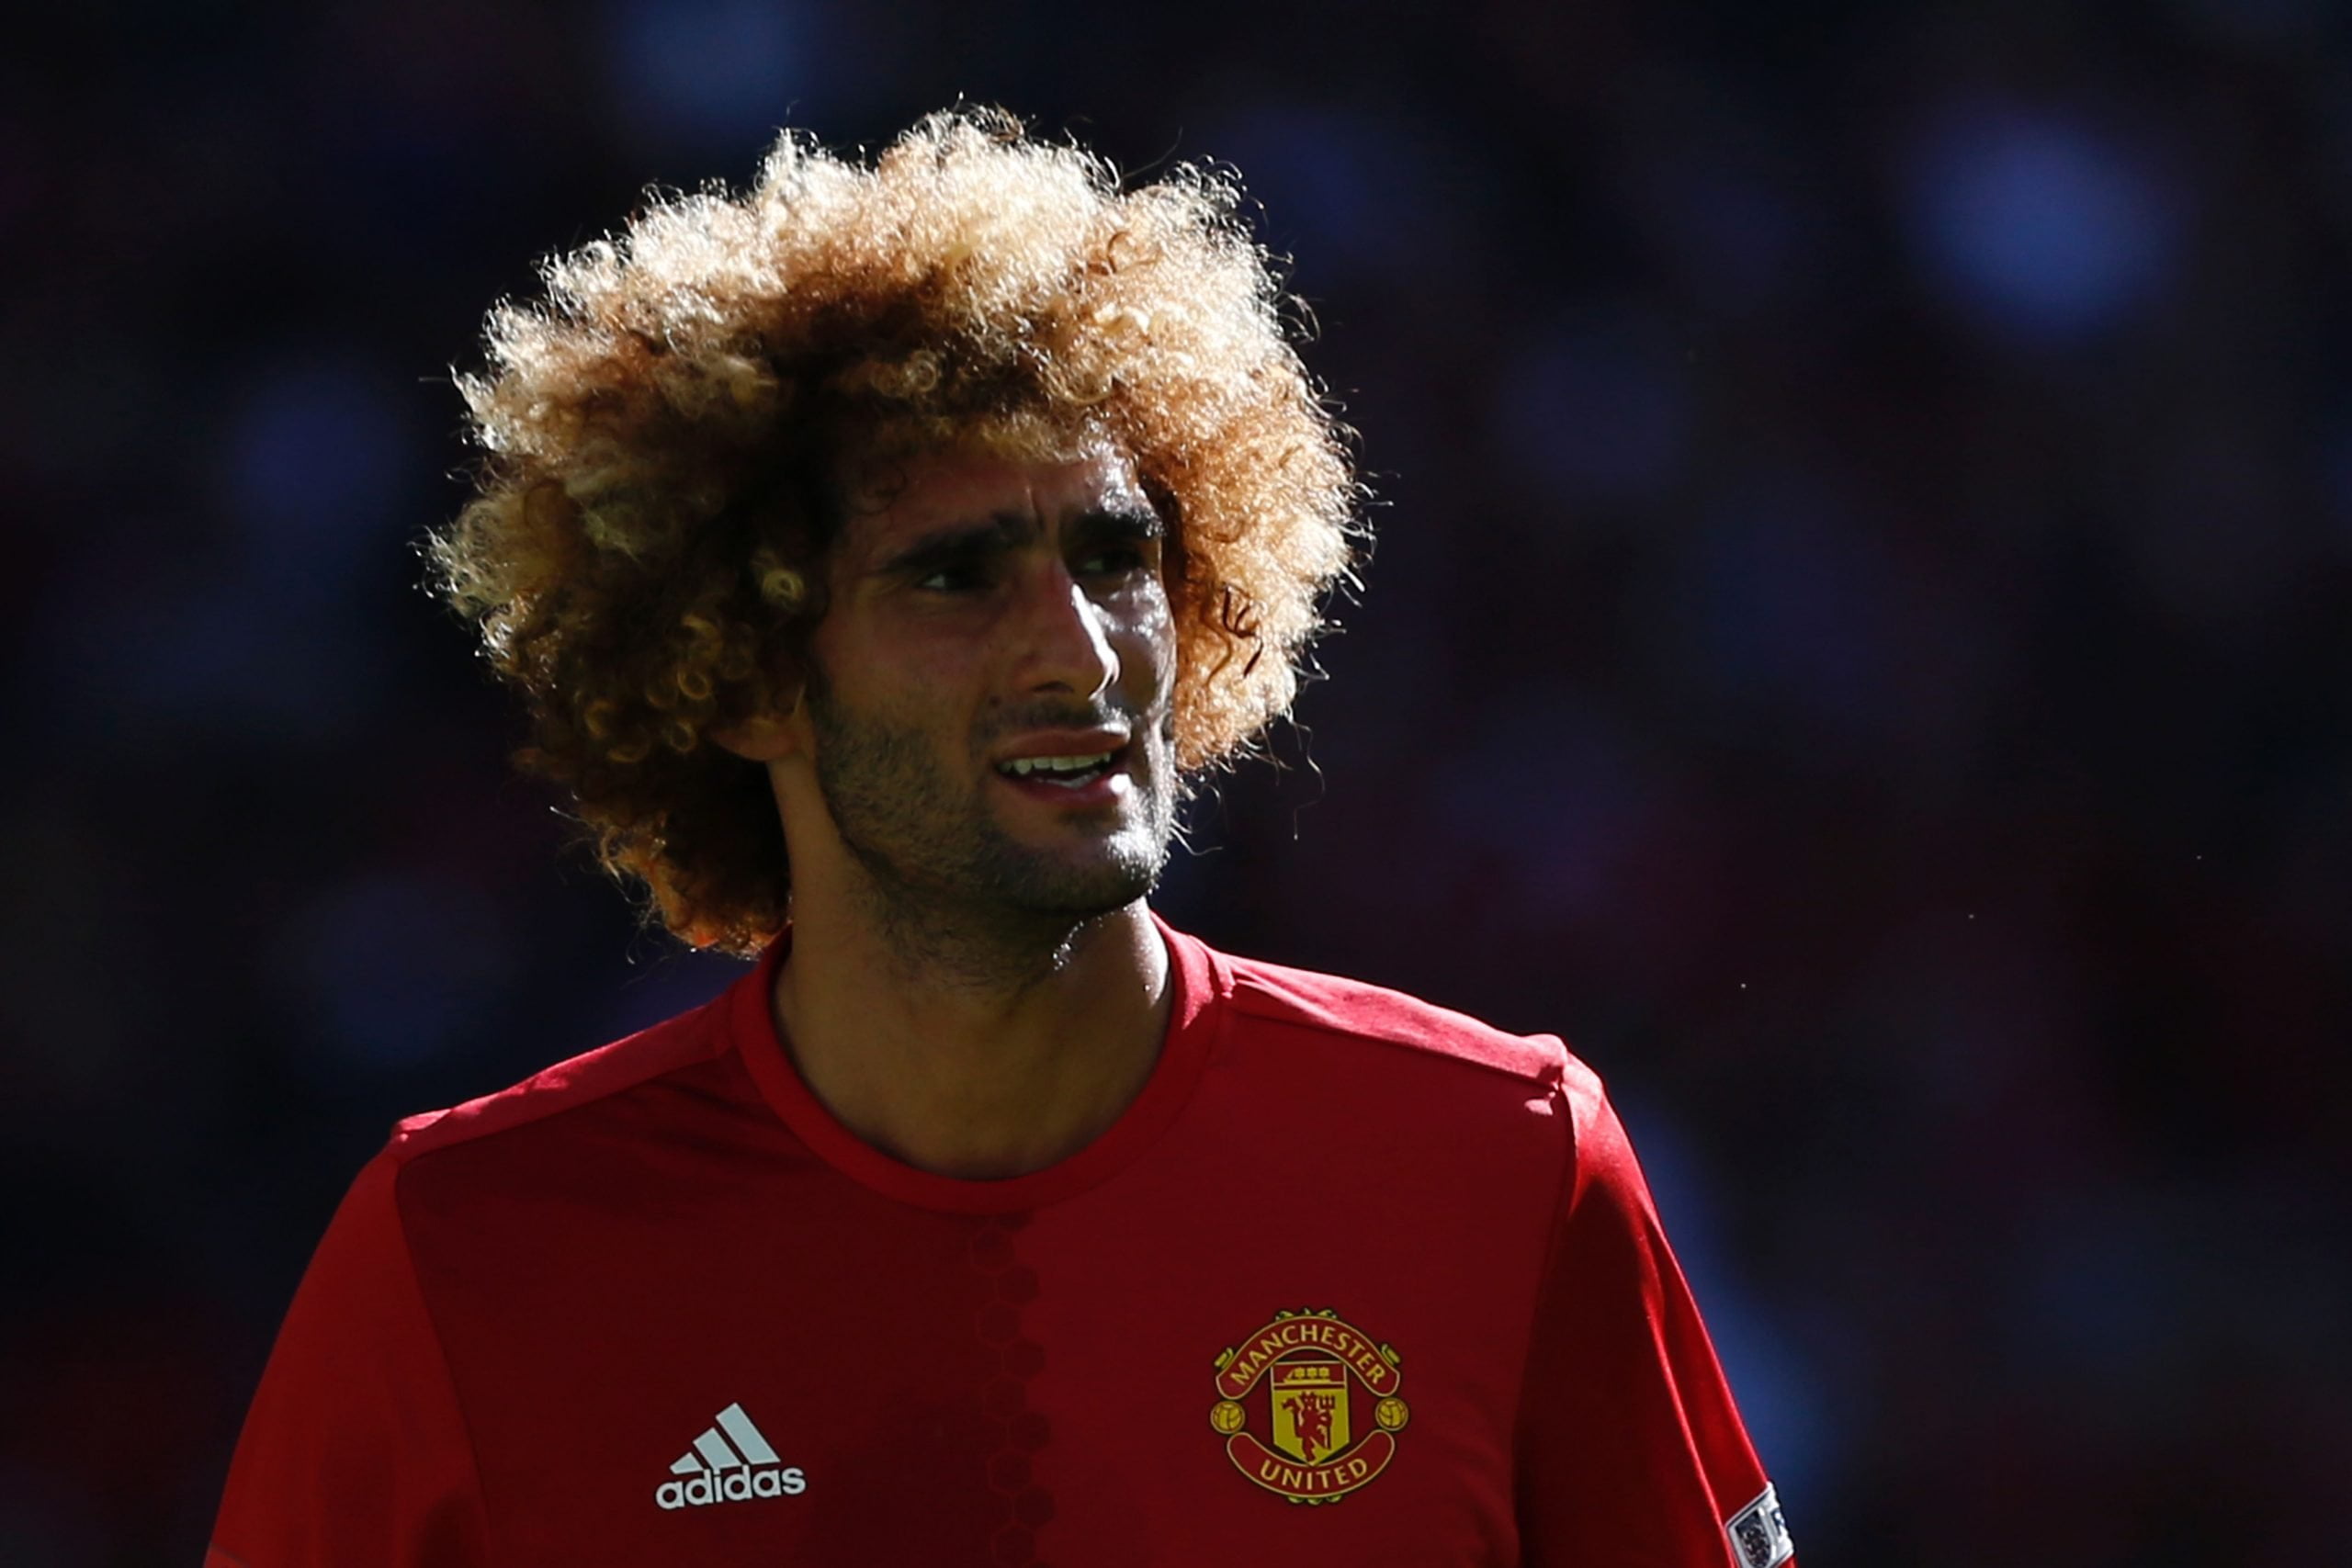 Manchester United's Belgian midfielder Marouane Fellaini reacts during the FA Community Shield football match between Manchester United and Leicester City at Wembley Stadium in London on August 7, 2016.  / AFP / Ian Kington / NOT FOR MARKETING OR ADVERTISING USE / RESTRICTED TO EDITORIAL USE        (Photo credit should read IAN KINGTON/AFP/Getty Images)